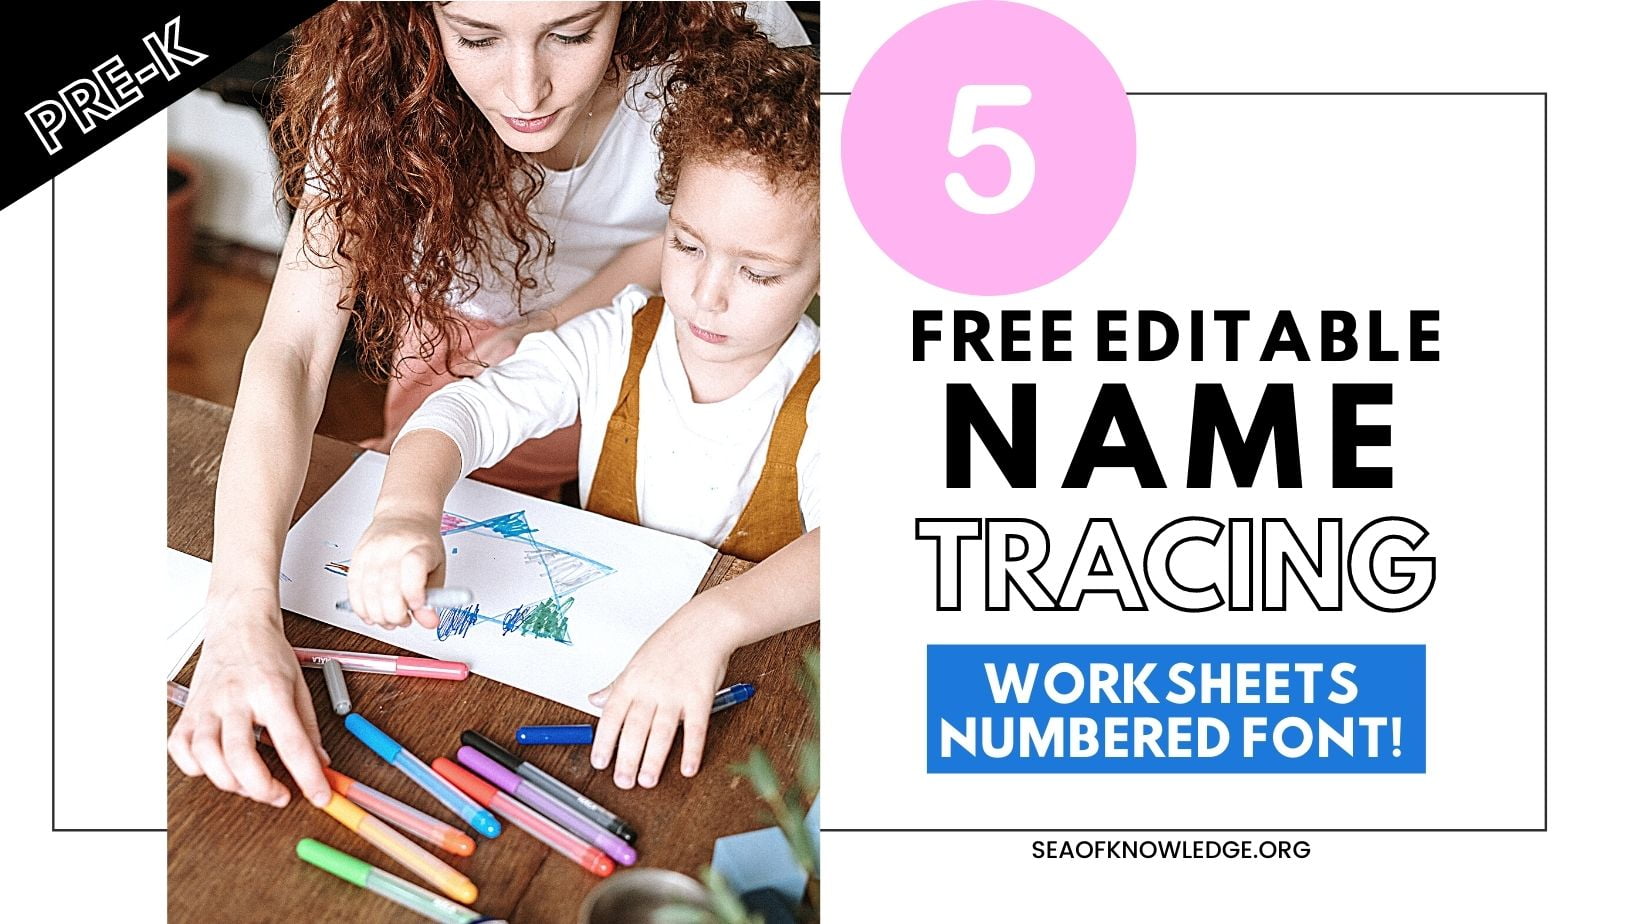 Preschool and kindergarten kids alike will love these Name Tracing Worksheet Printables and activities to help kids with their letter formation and pencil grip.